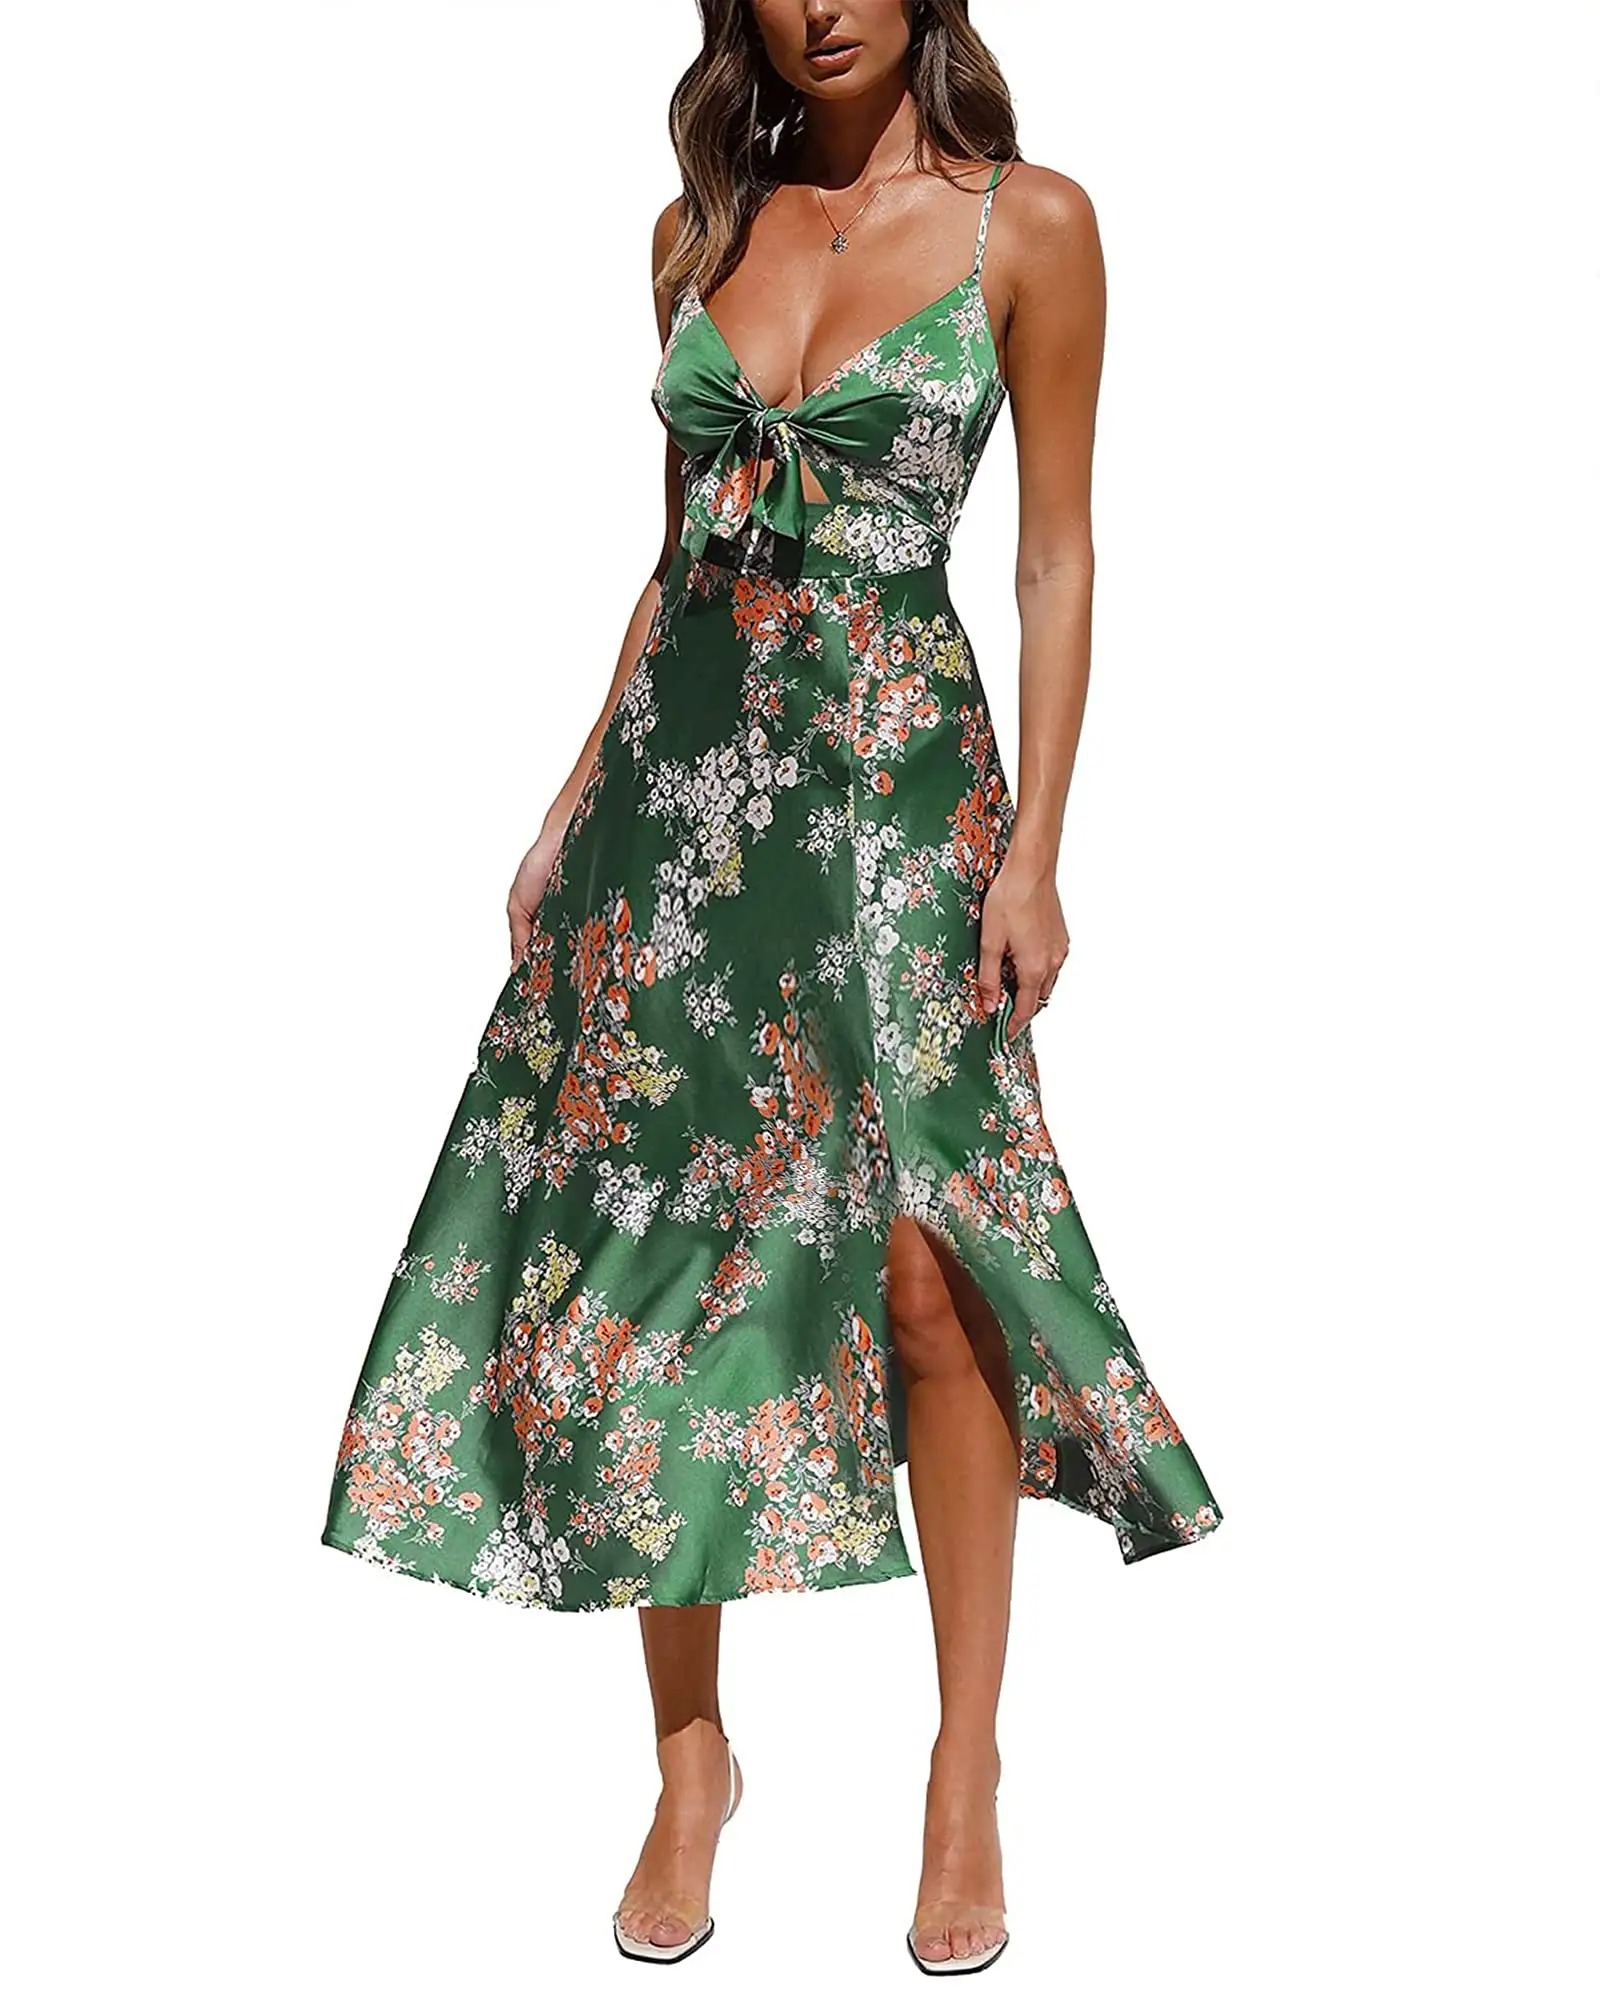 Women's dresses Customized new high quality casual silk floral skirt with thin straps Floral dress for women